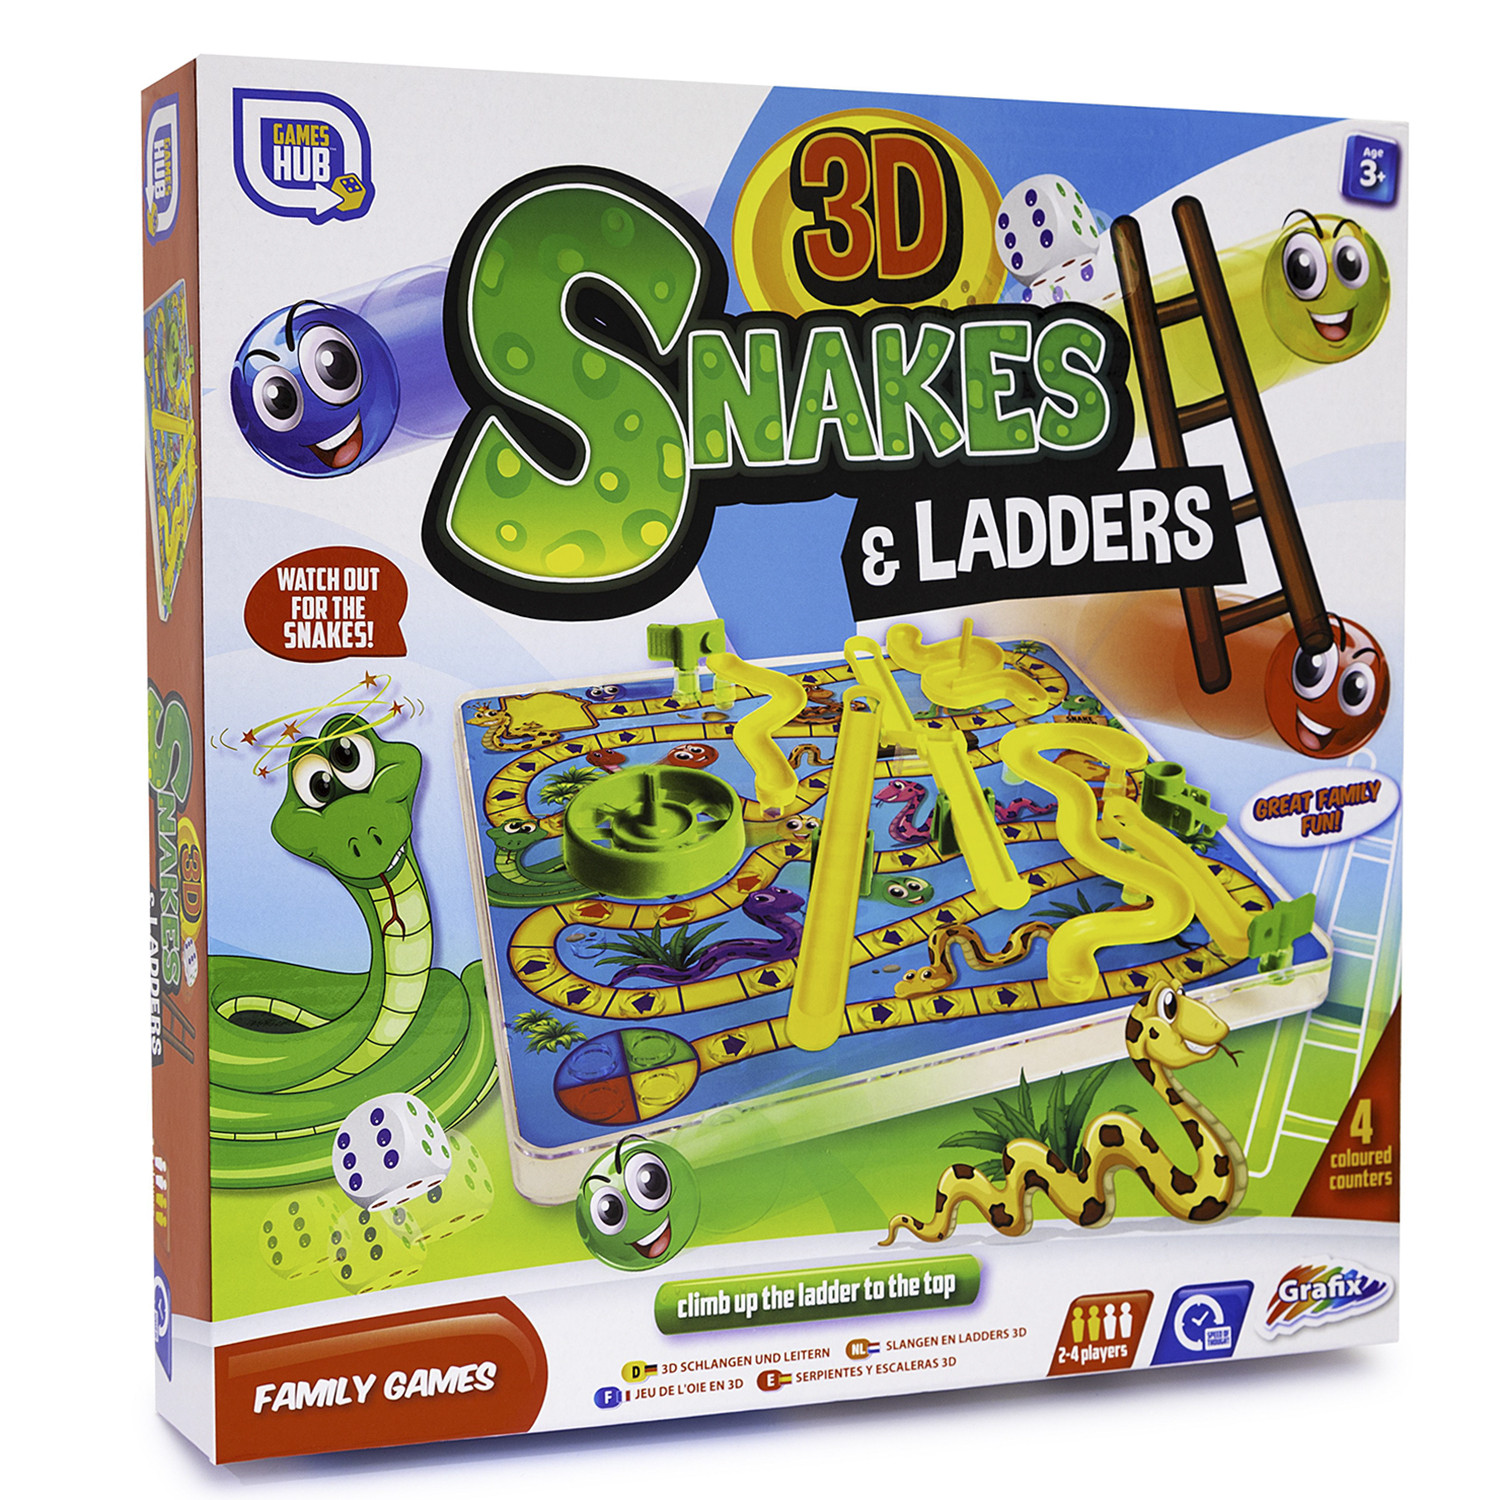 Games Hub 3D Snakes And Ladders Image 1